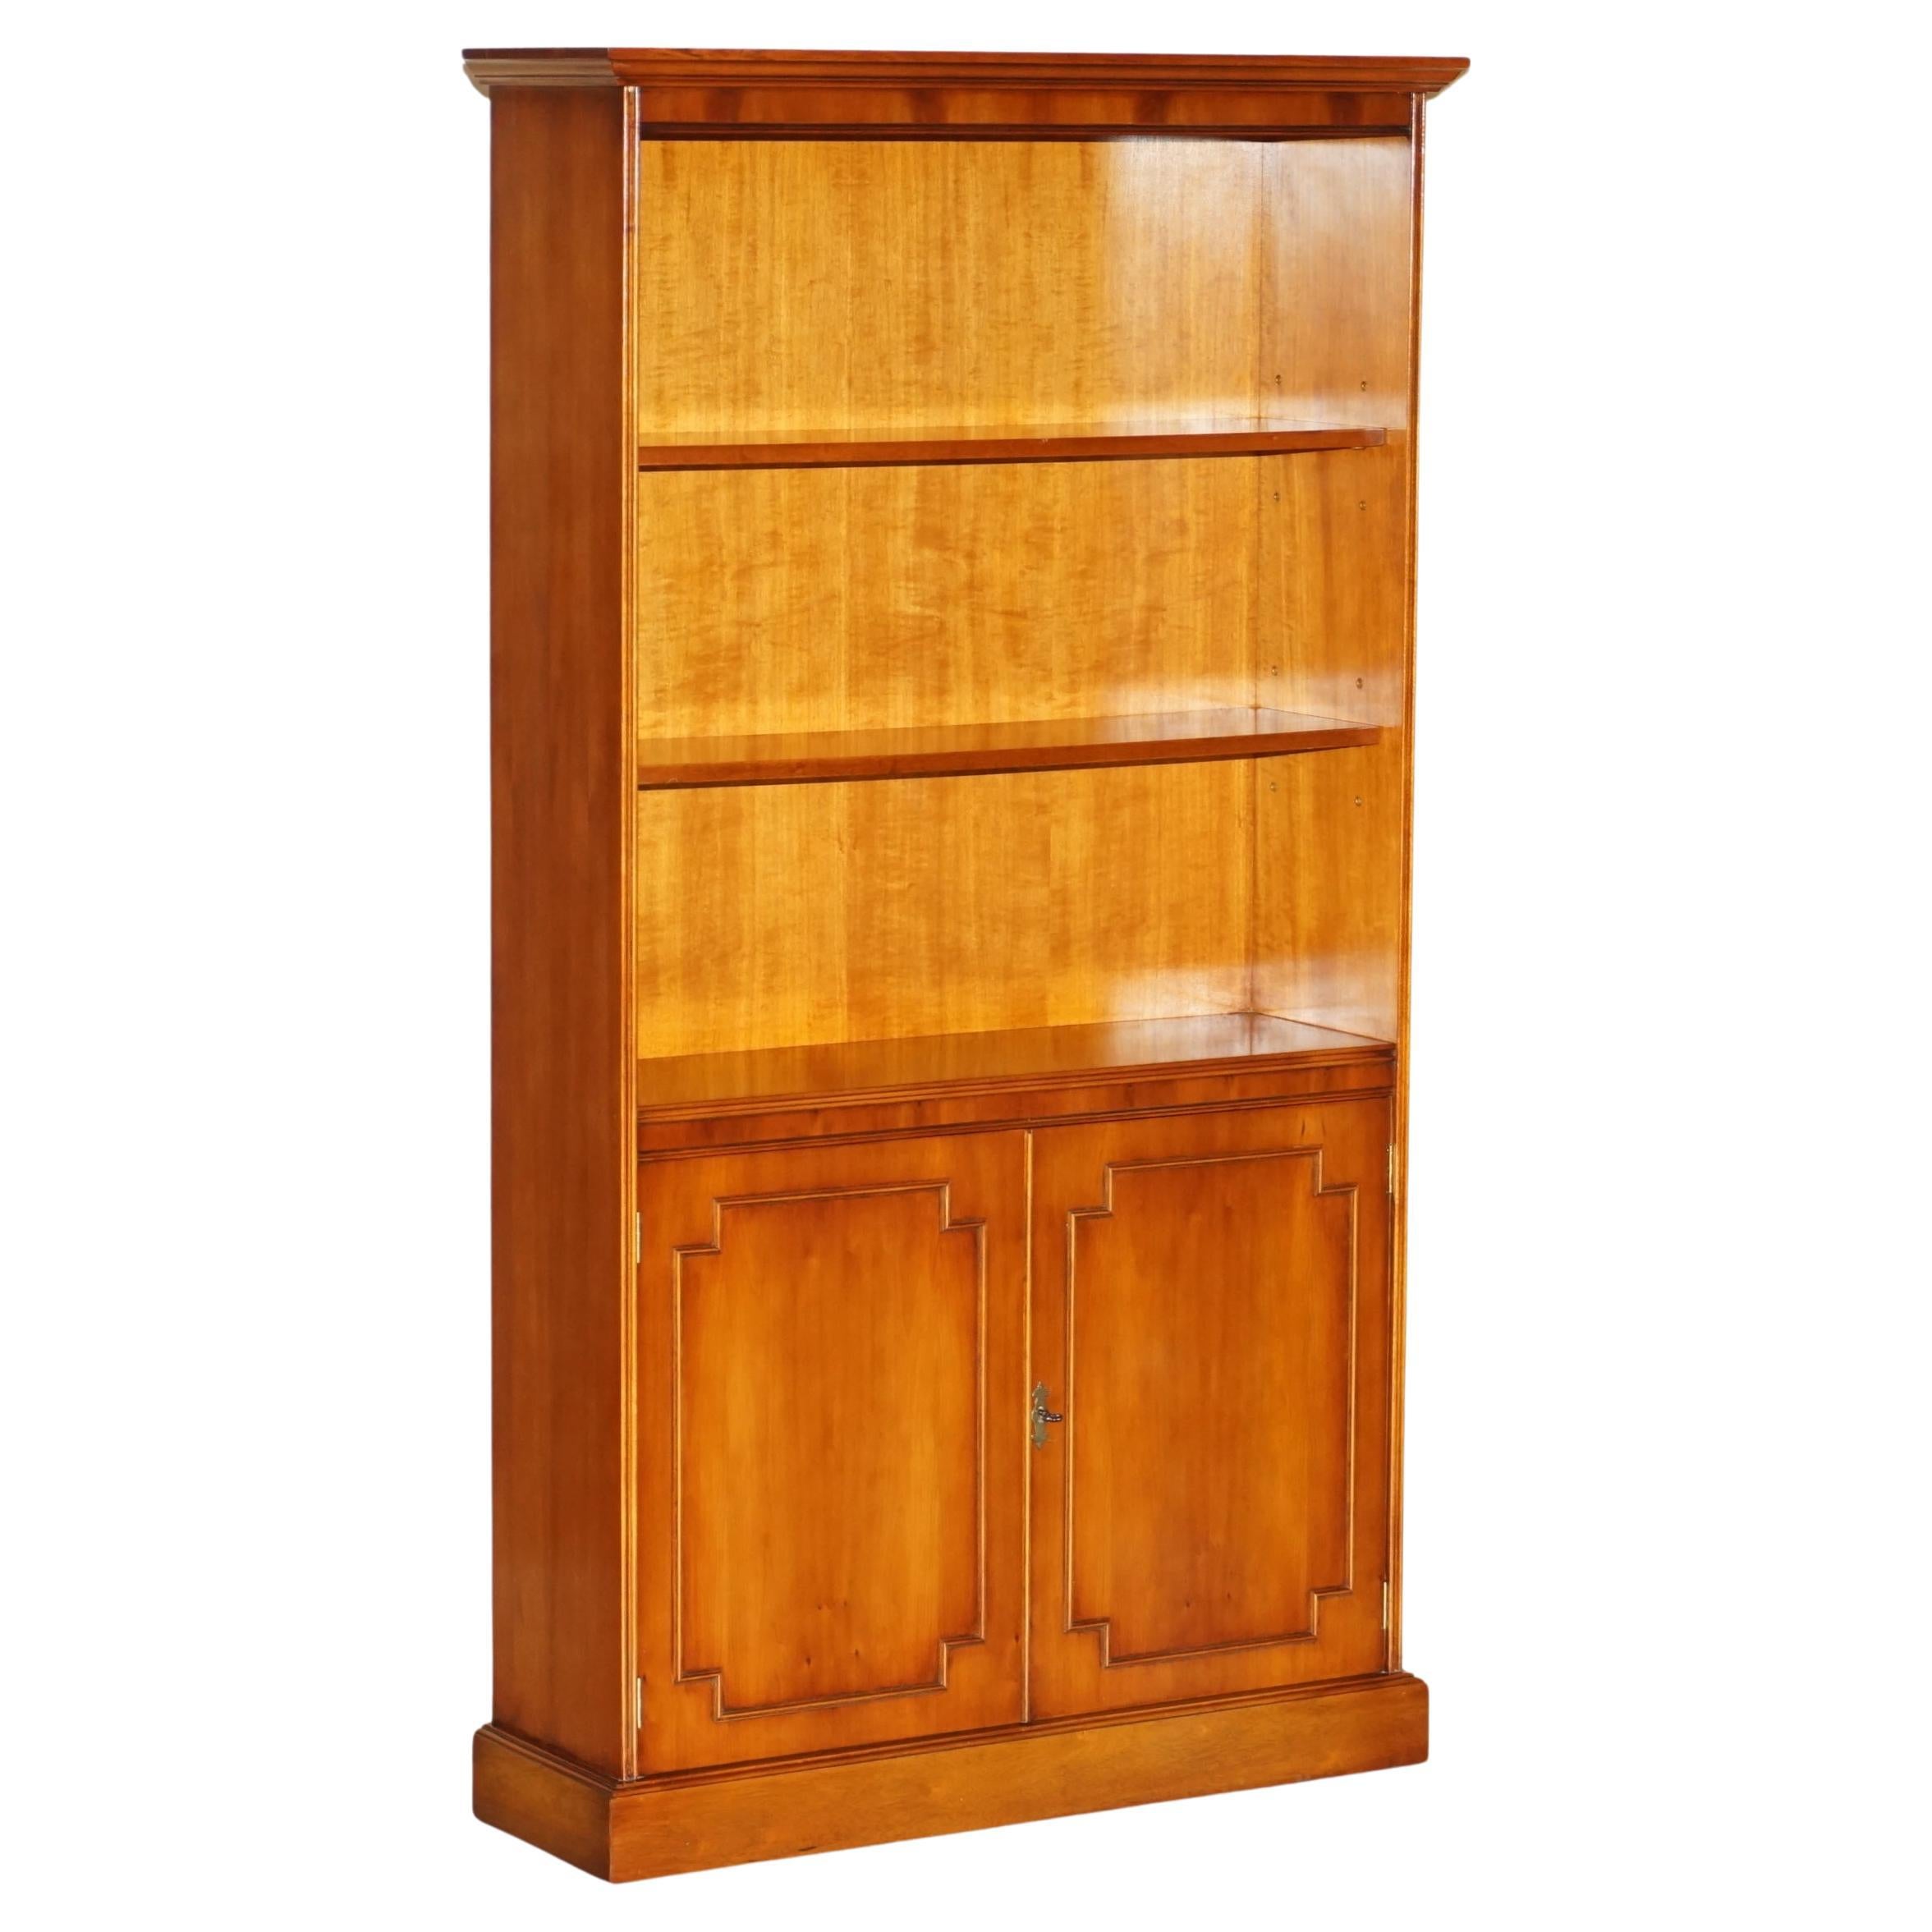 Lovely Bradley Furniture England Yew Wood Open Library Bookcase Cupboard Base For Sale